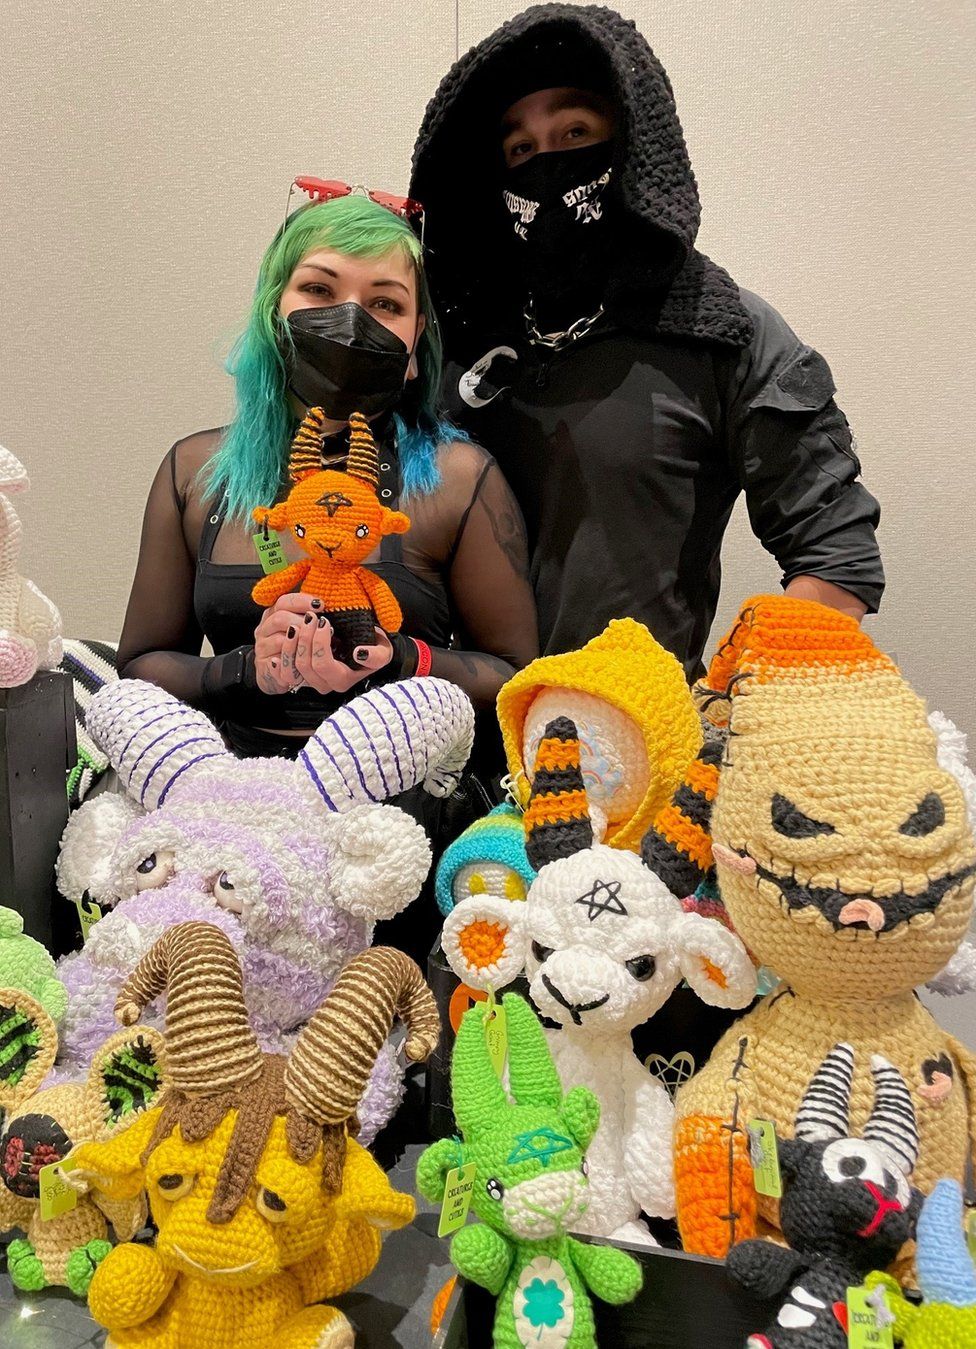 Little Nicky, who has green hair and wears black, is smiling in a Covid-19 mask. She stands in front of a table covered in crocheted toys with horns, flanked by her partner who wears lack and a Covid mask.